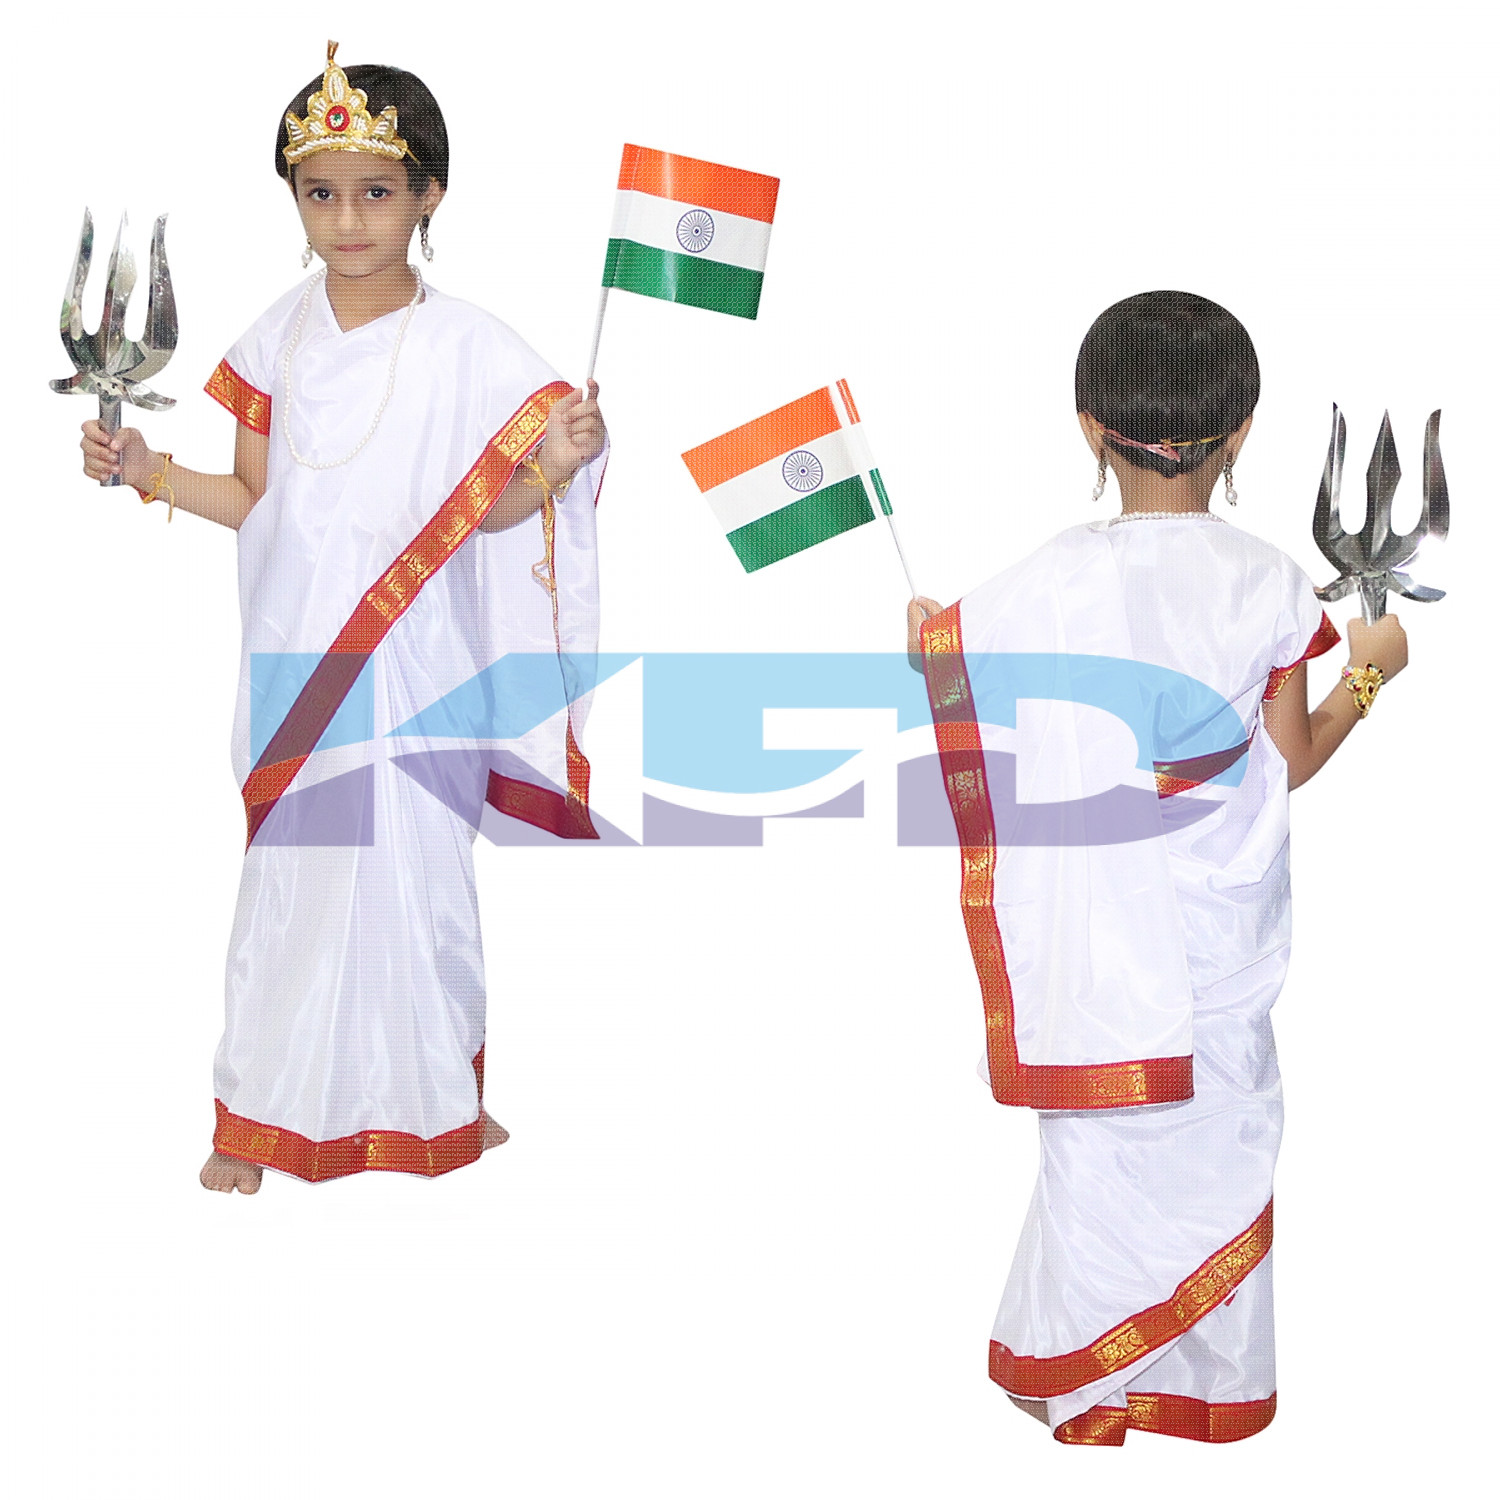 Bharat Mata fancy dress for kids,National Hero Costume for School Annual function/Theme Party/Competition/Stage Shows Dress